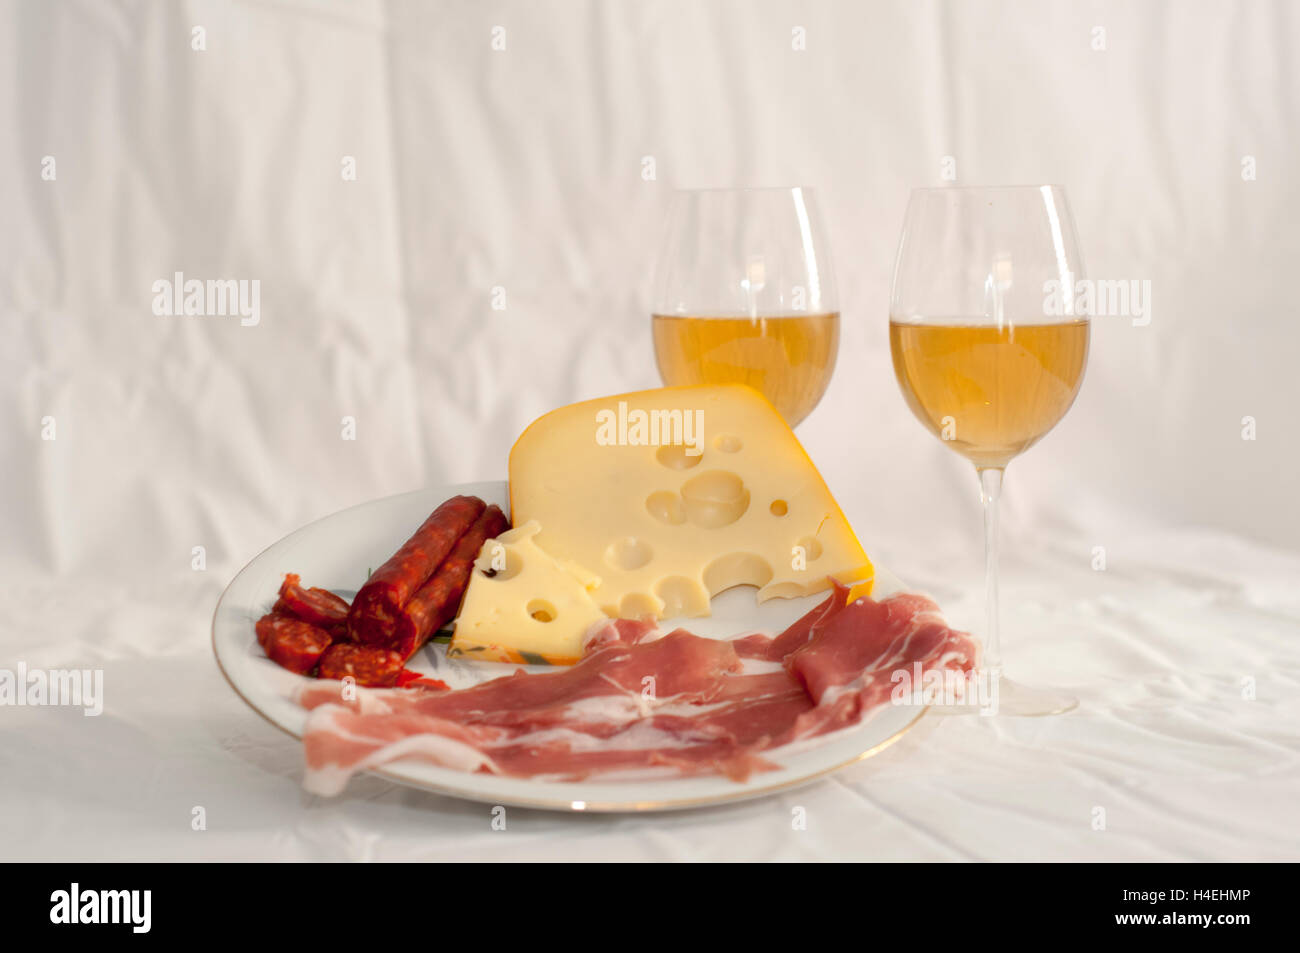 Plate of meats and cheese appetizer with two stemmed wine glasses with white wine on white cloth Stock Photo